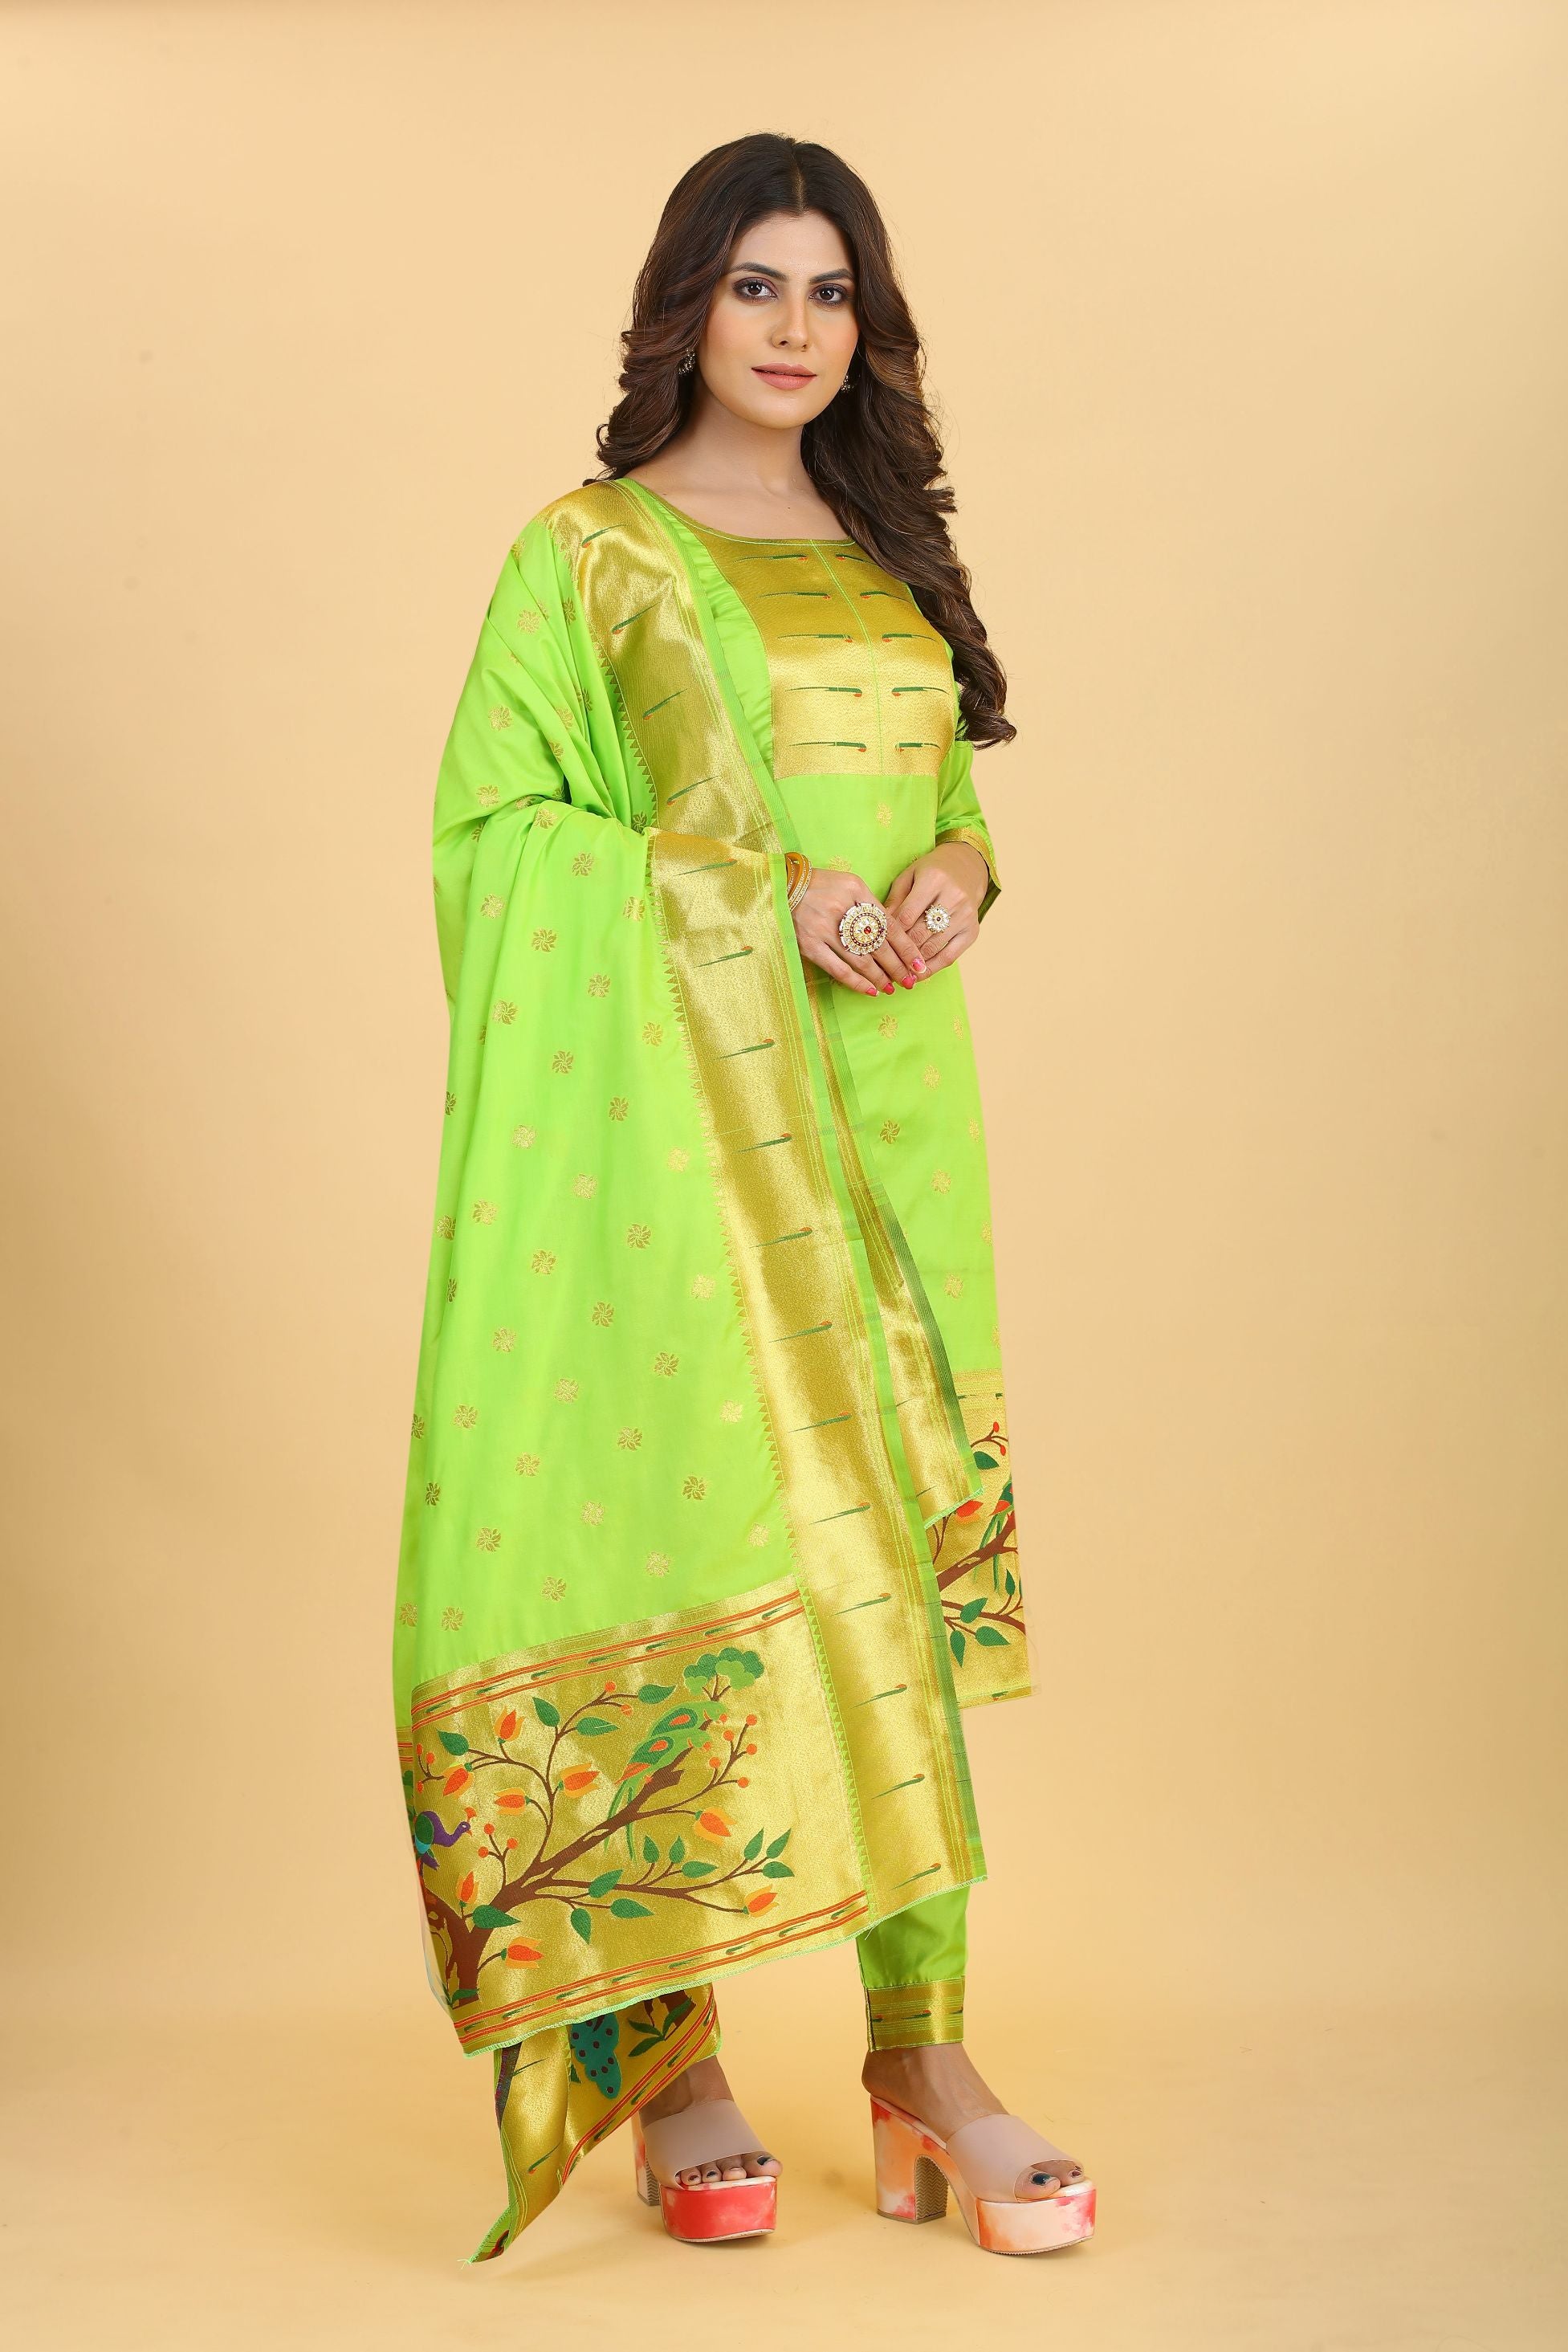 Lemon Green Color Paithani Style Design latest fashion in indian suits